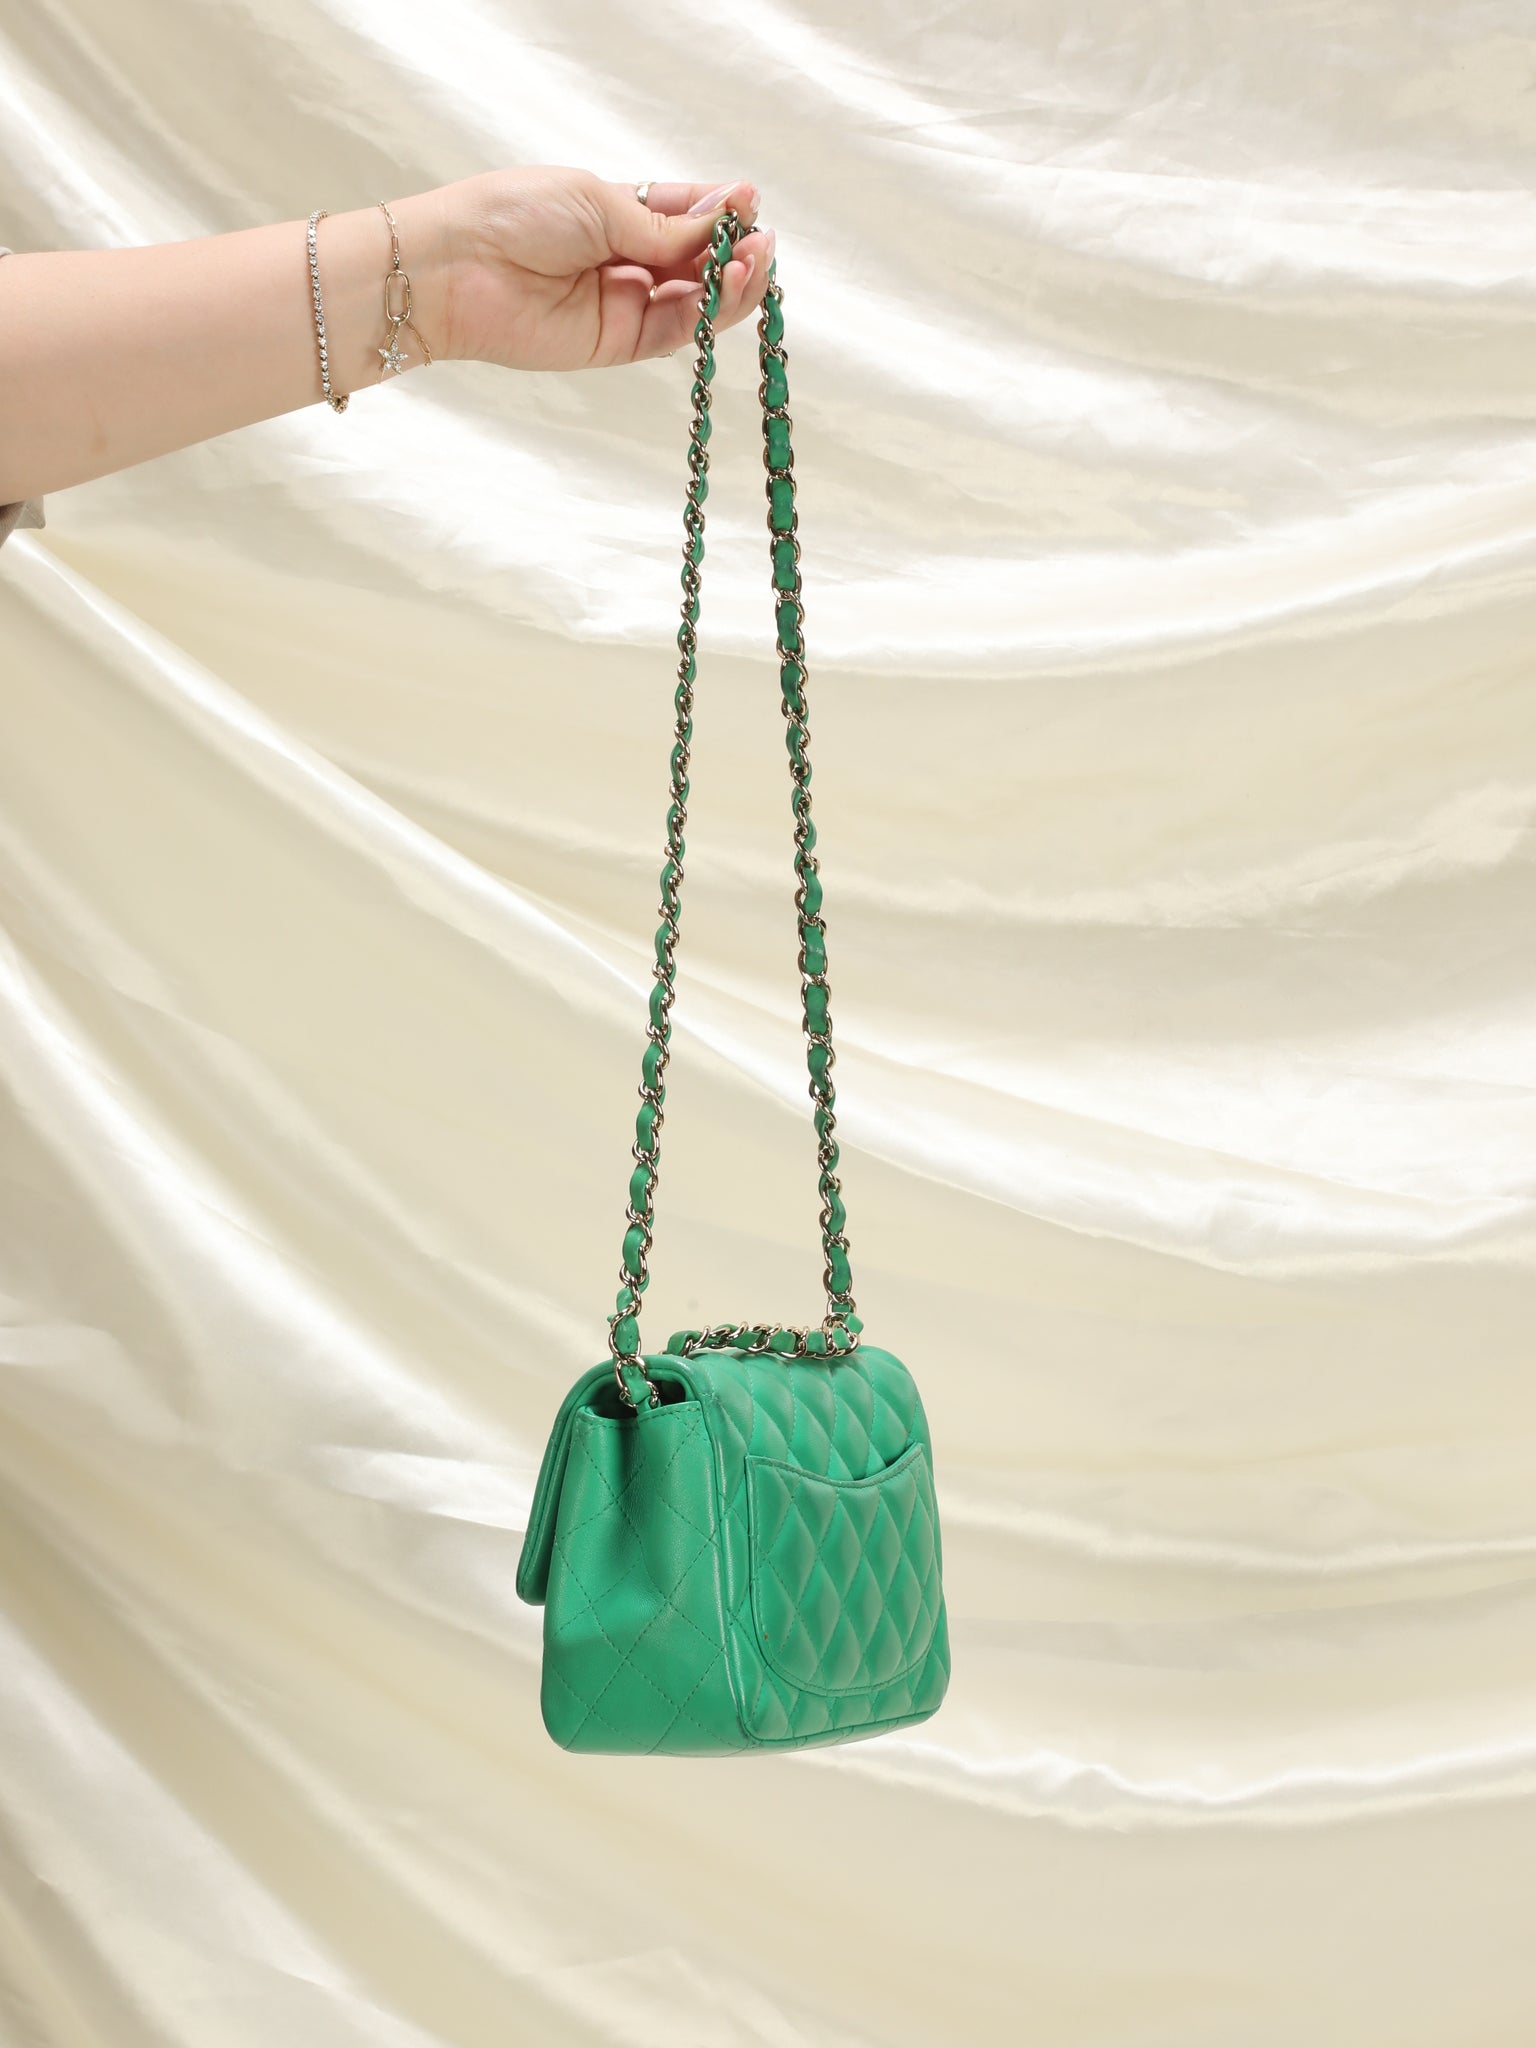 Mini Quilted Square Bag Chain Decor Fashionable Flap Crossbody Bag